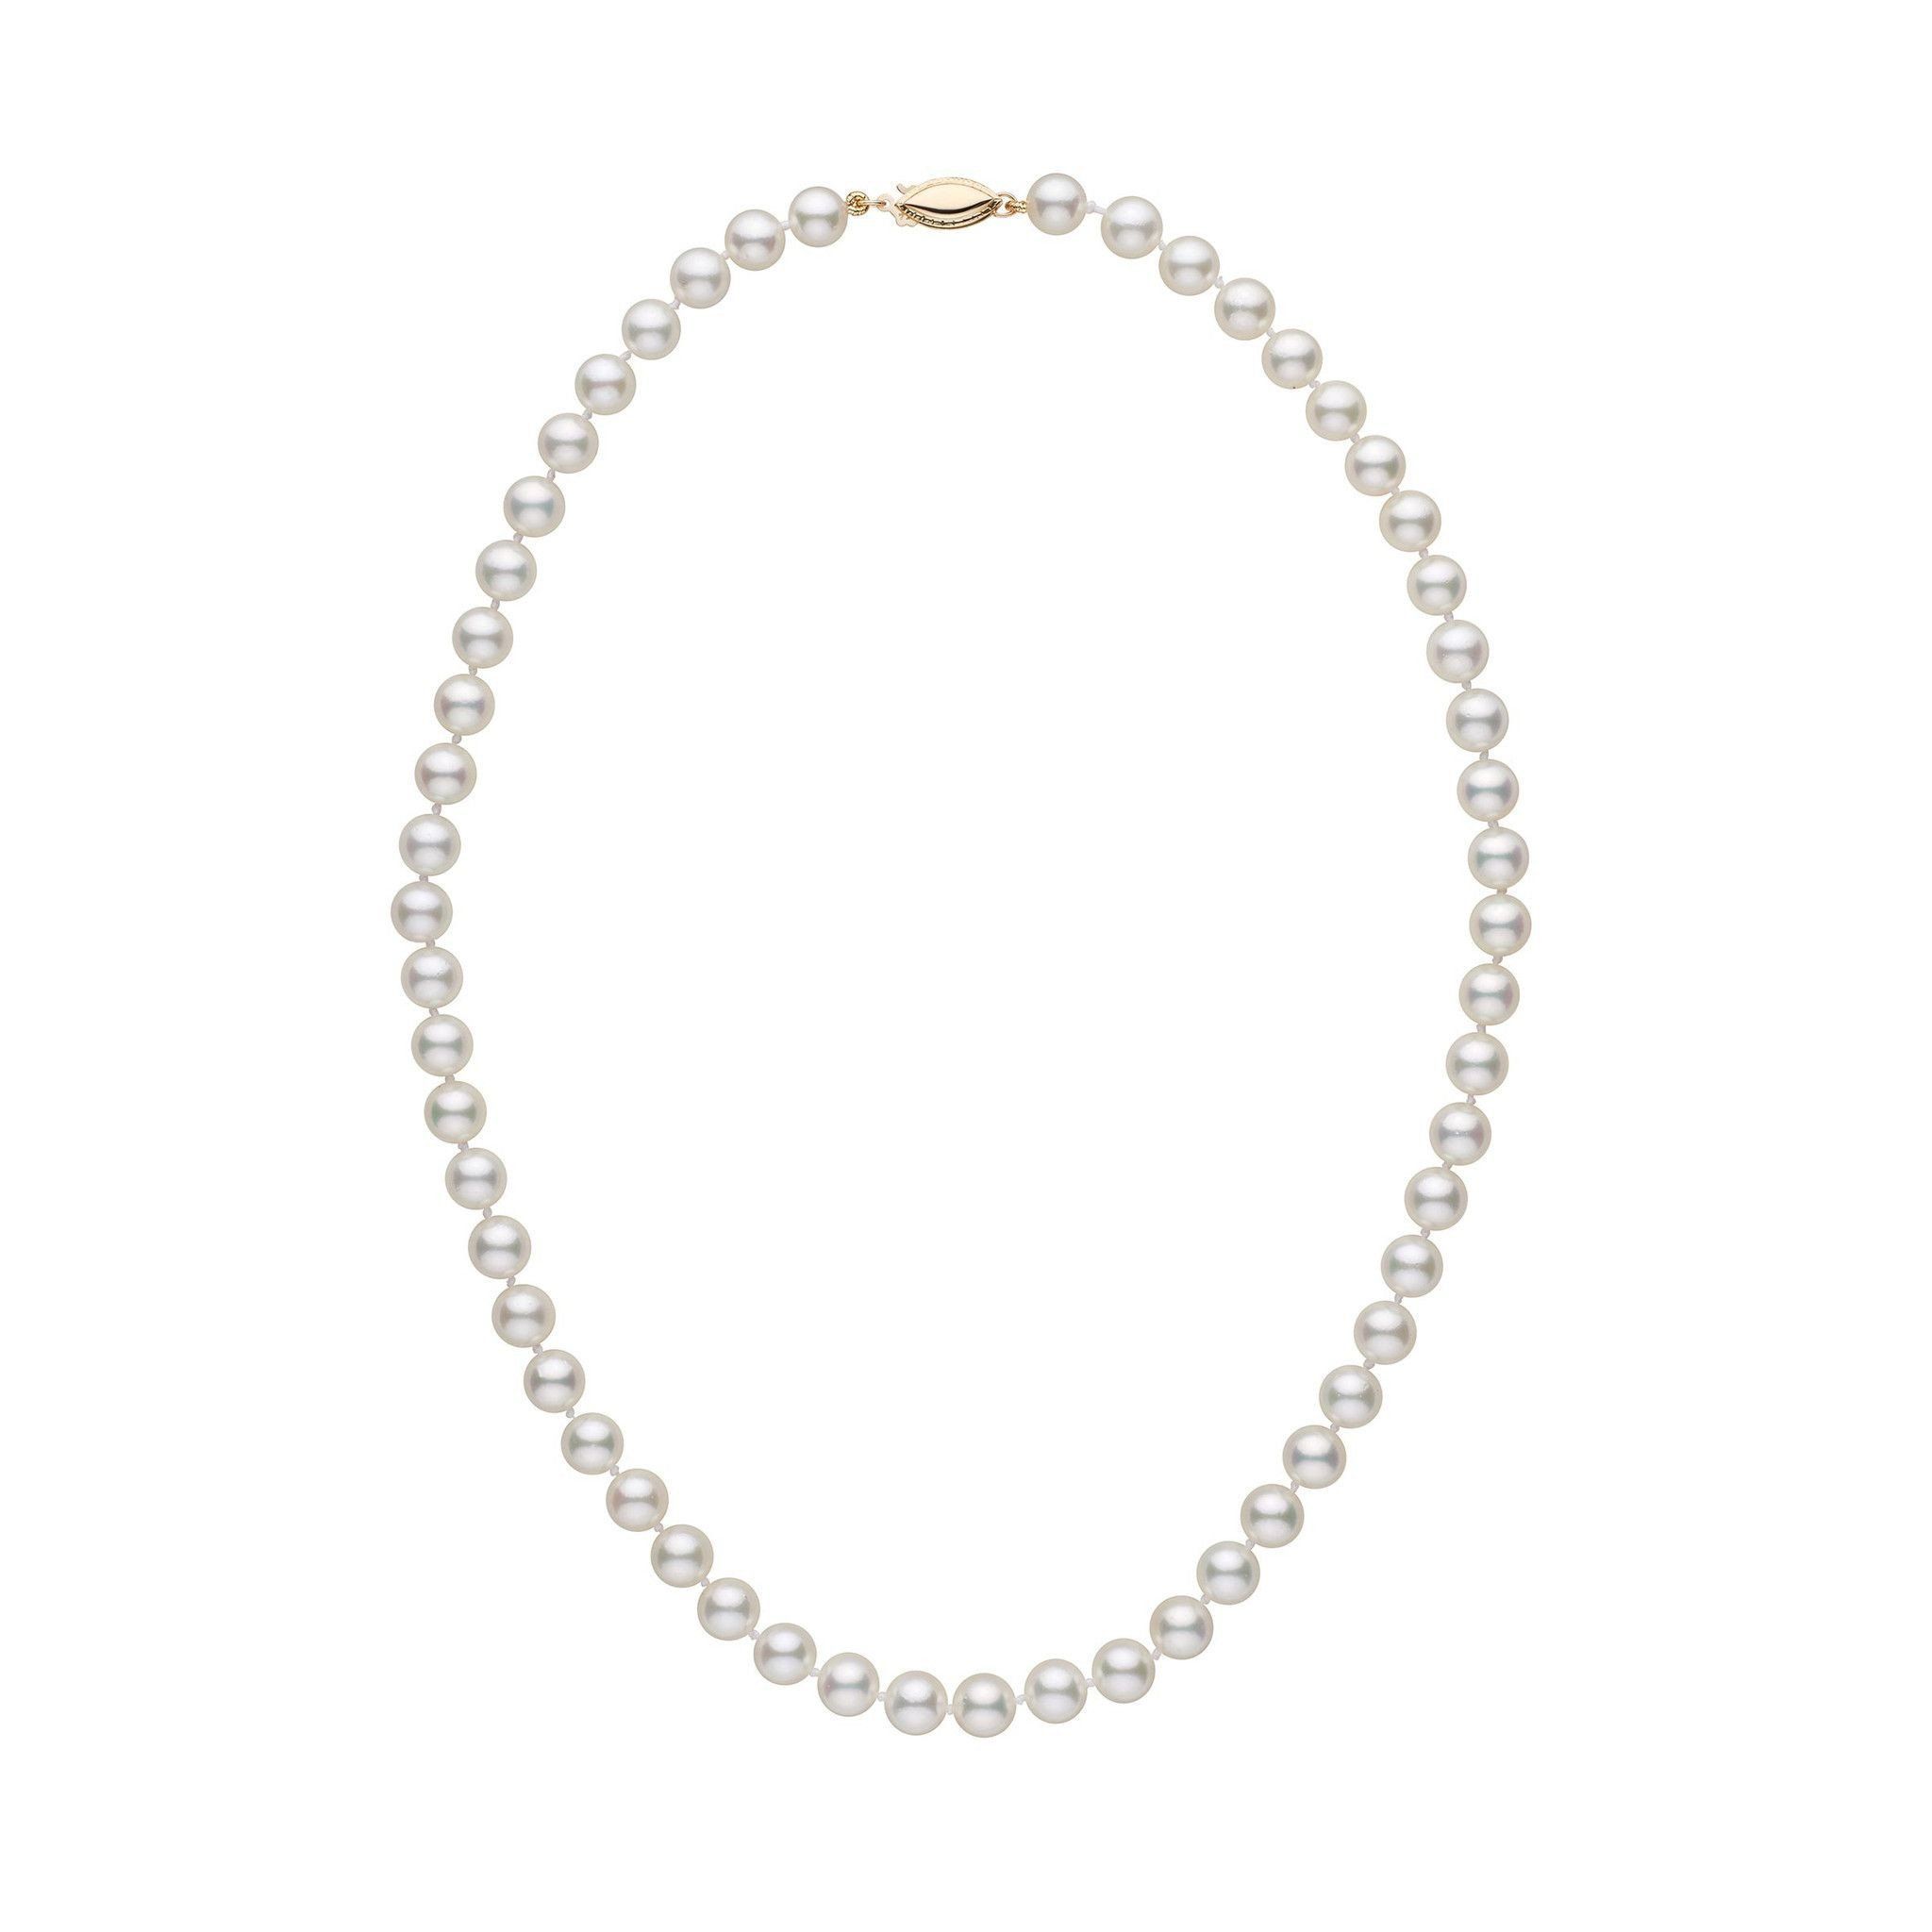 Products 6.5-7.0 mm 16 Inch AA+ White Akoya Pearl Necklace Yellow Gold